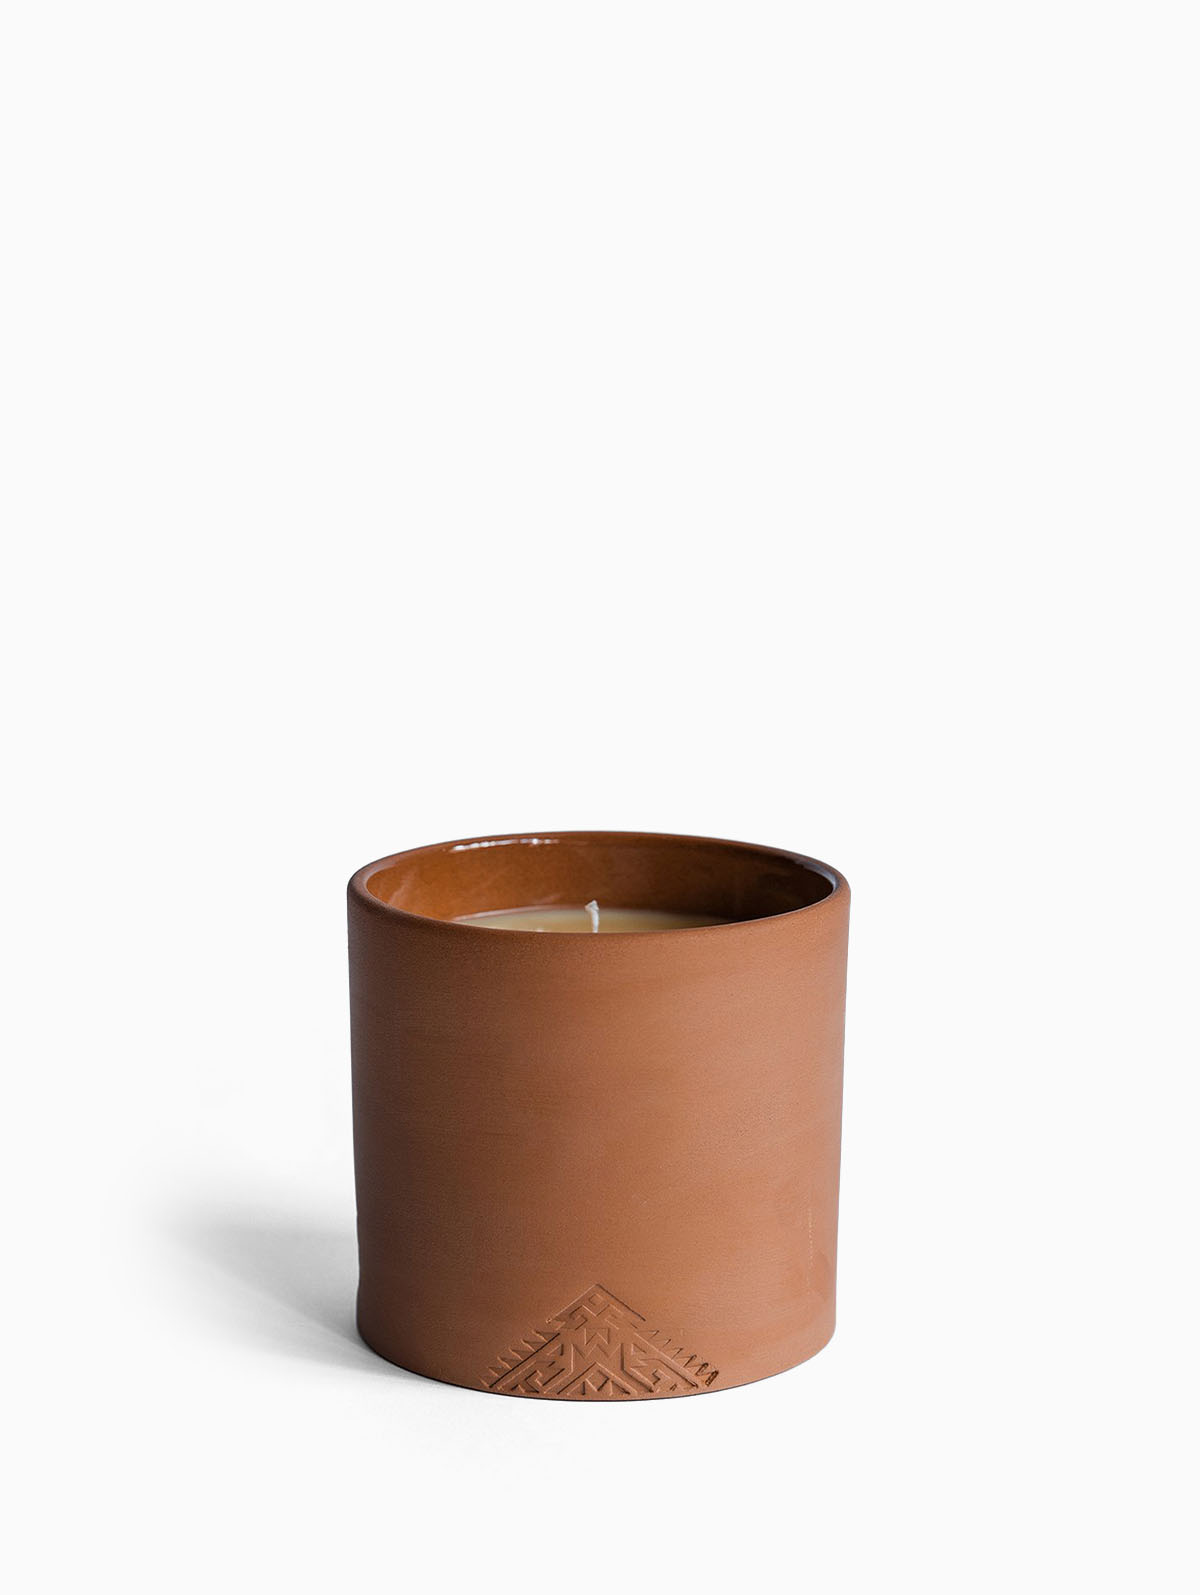 The Very Good Candle Company